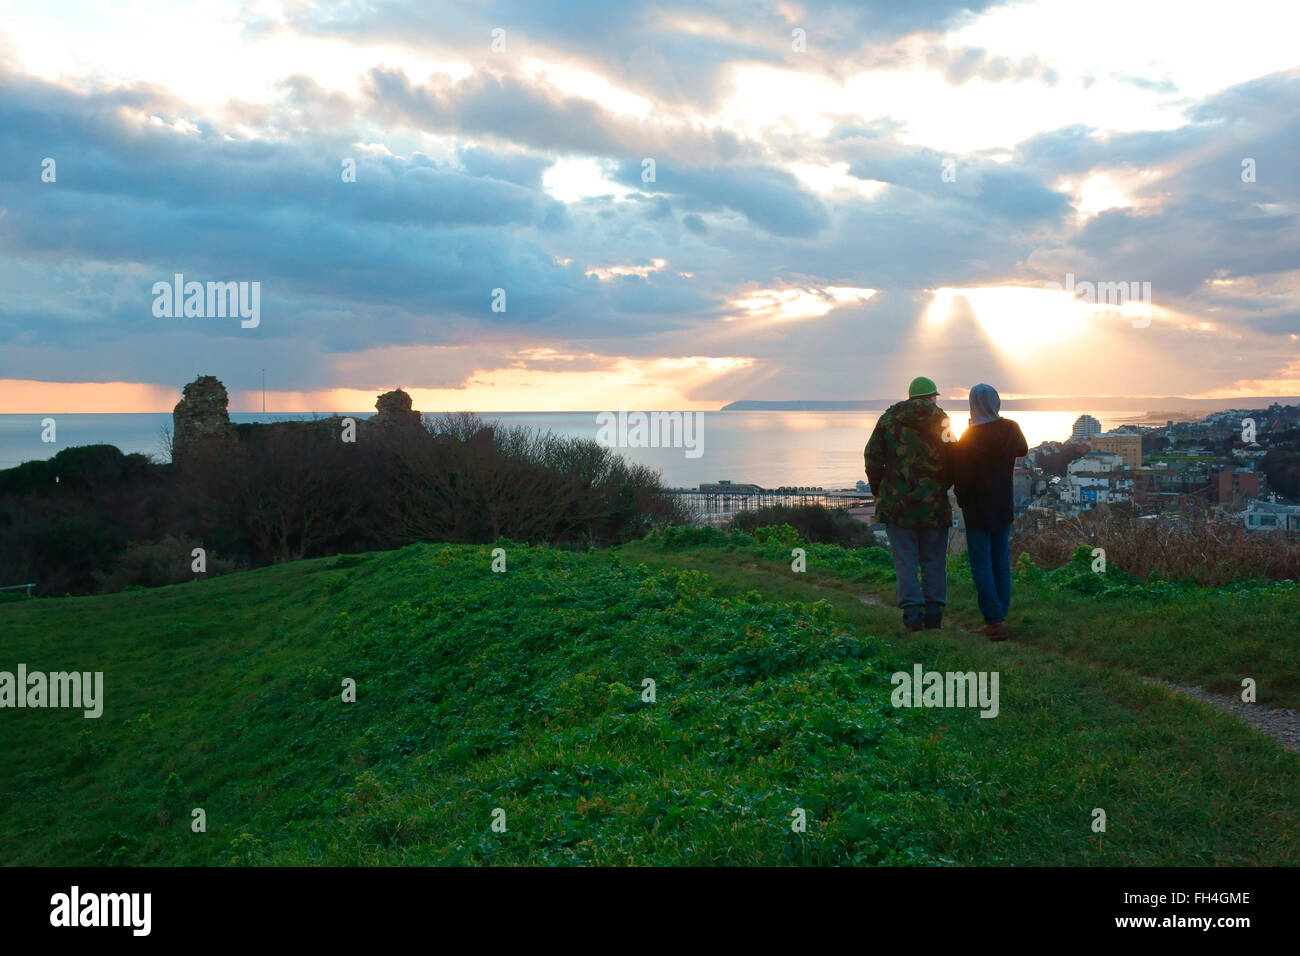 Hastings, East Sussex, UK. 23rd February 2016. UK Weather: After a fine sunny day people taking photo of a spectacular sunset over Hastings Castle. Stock Photo